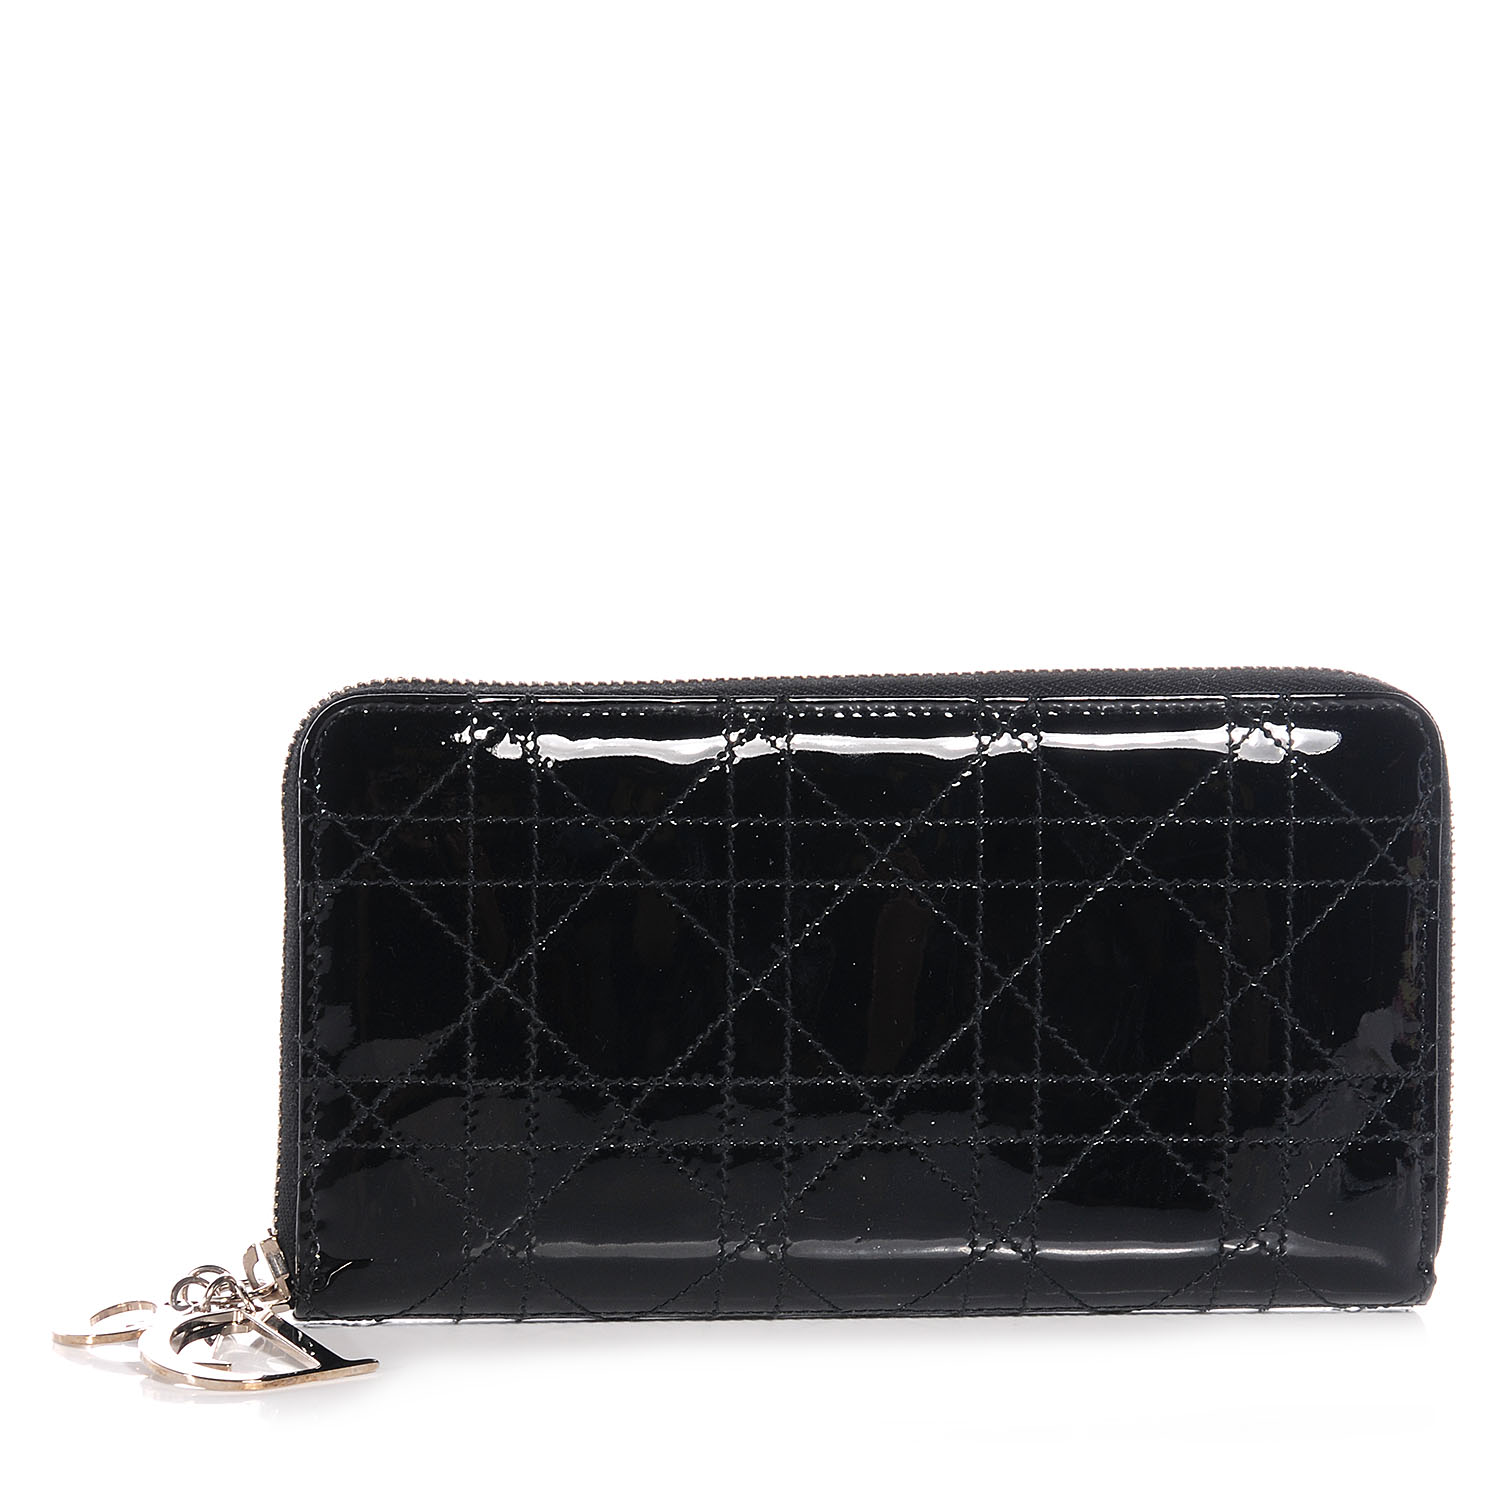 CHRISTIAN DIOR Patent Cannage Lady Dior Continental Wallet Black 69249